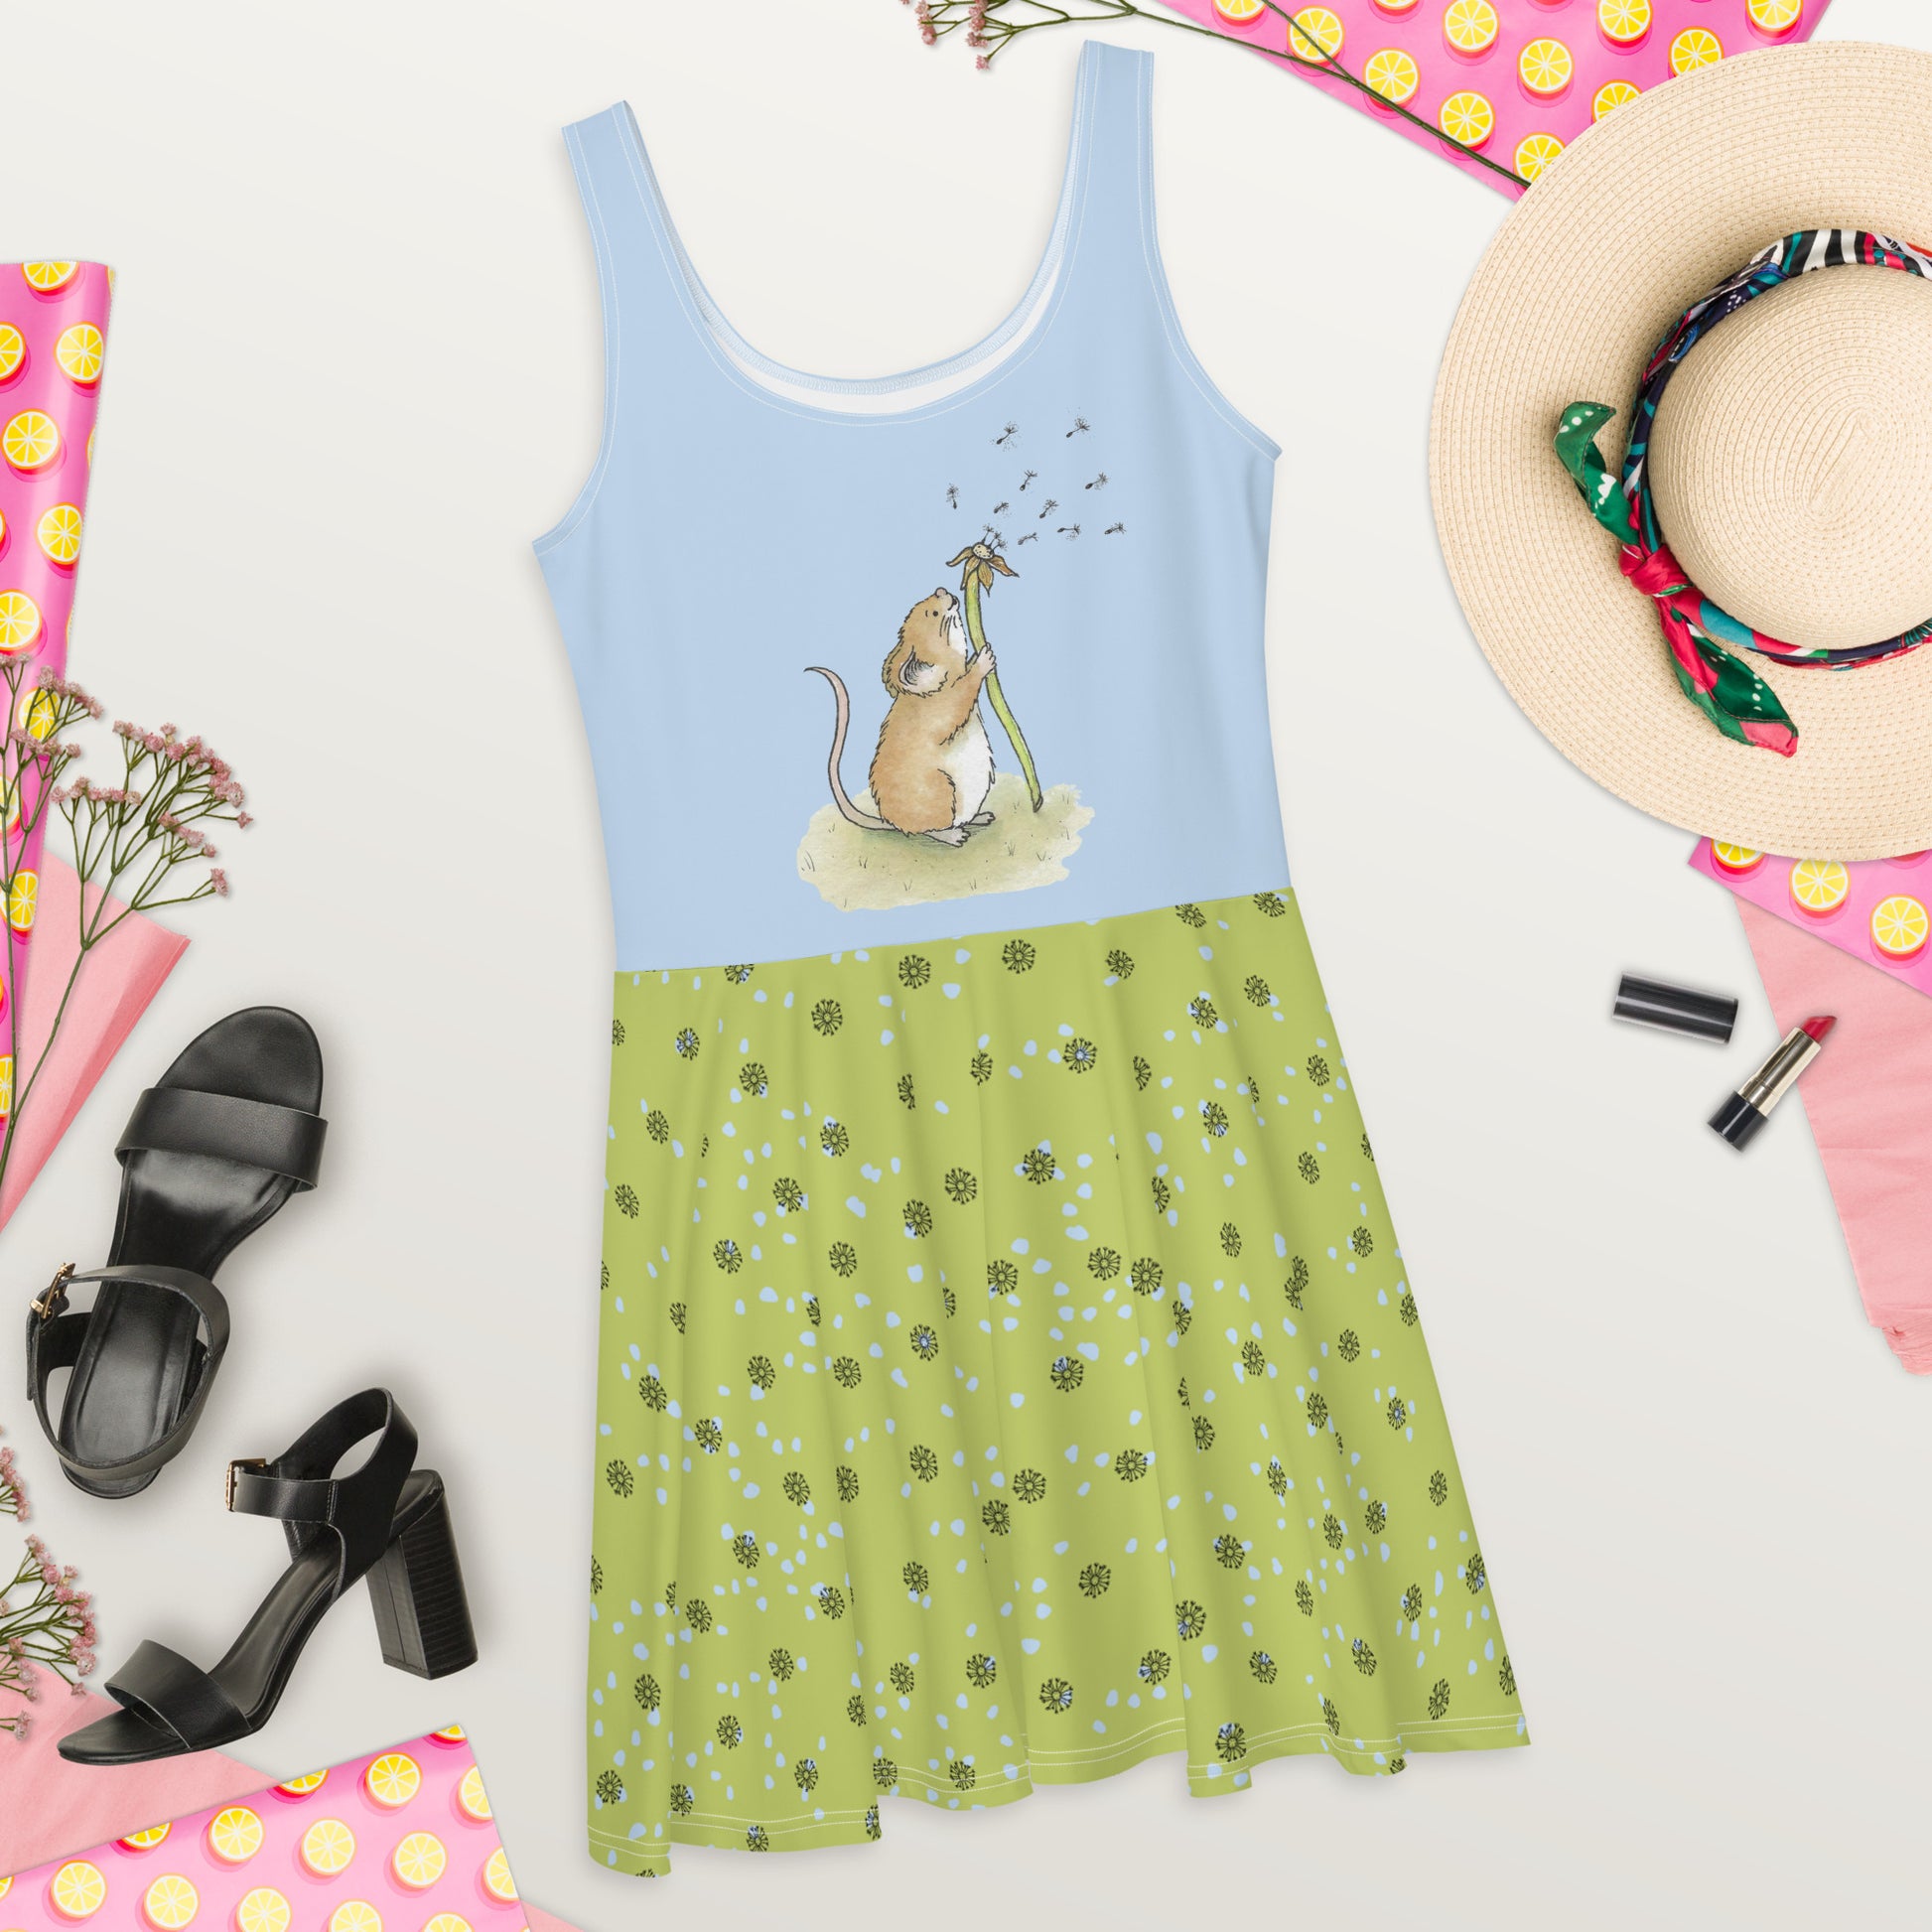 Sleeveless skater dress featuring Dandelion Wish design of a mouse making a wish on a dandelion fluff on a blue top. The mid-thigh length flared green skirt features flowers and dot details. Also has an elastic waistline. Flat lay view on floor by sunhat, black high heels, lipstick, pink polka dot wrapping paper, and flowers.